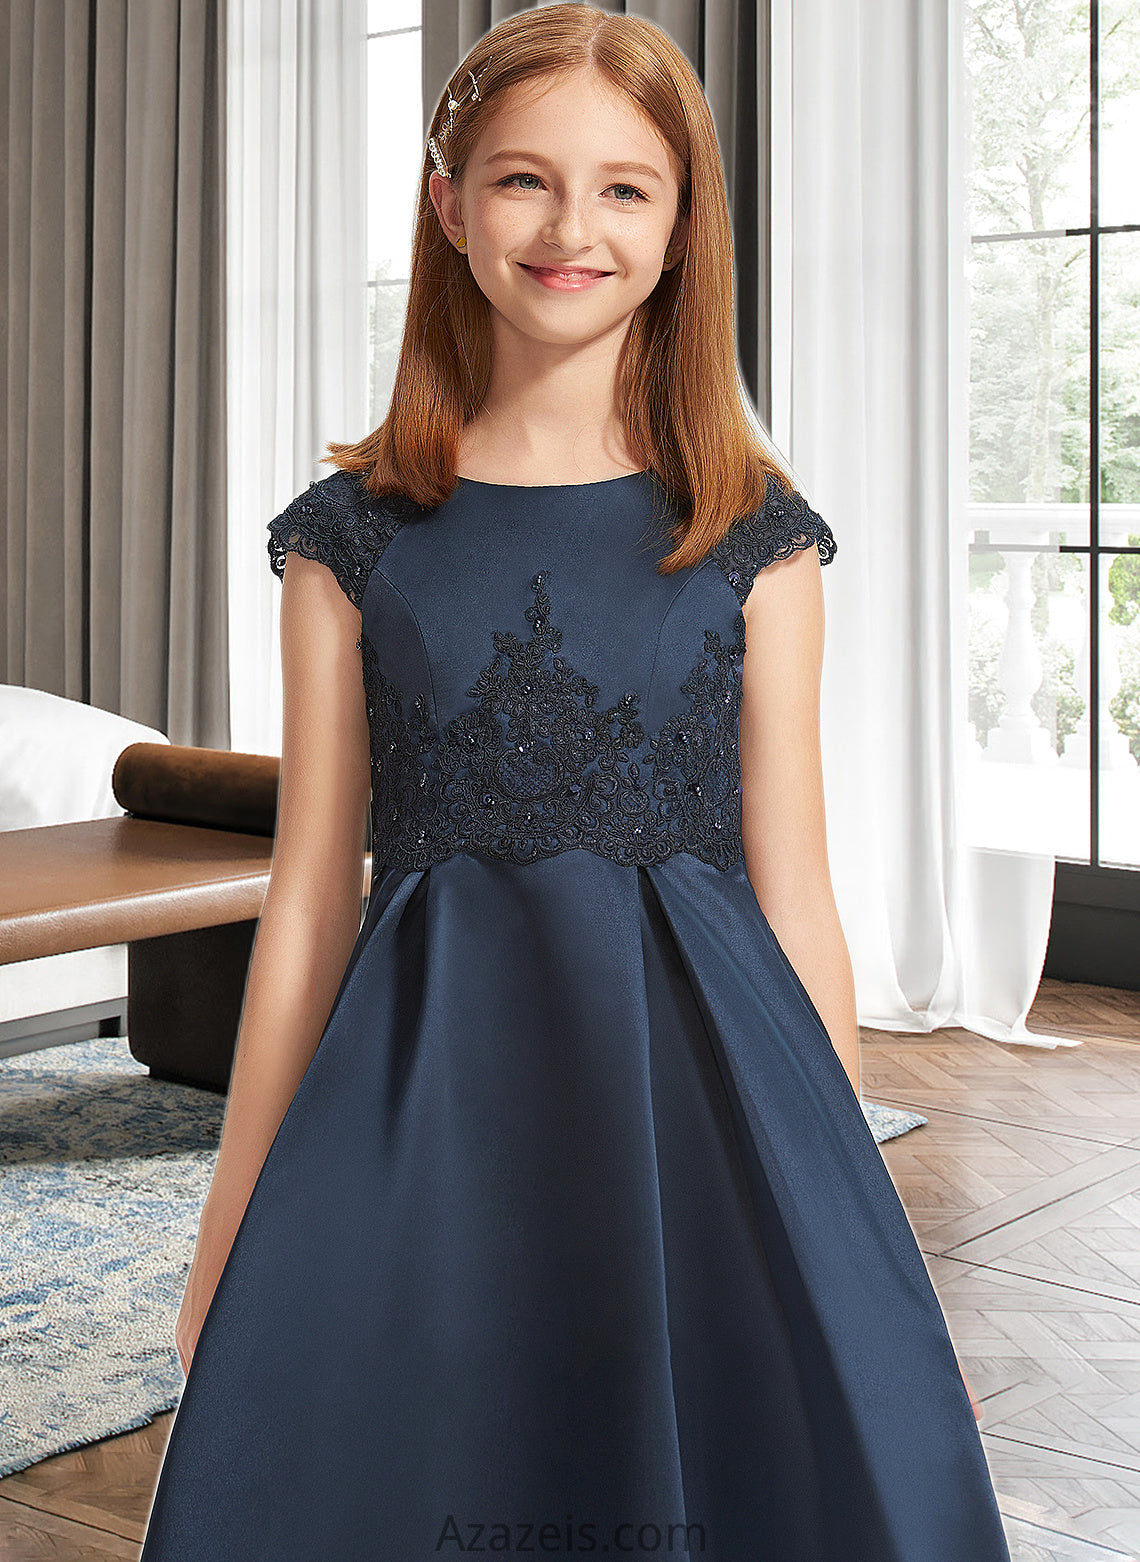 Nellie A-Line Scoop Neck Floor-Length Satin Lace Junior Bridesmaid Dress With Beading Sequins Bow(s) DFP0013574